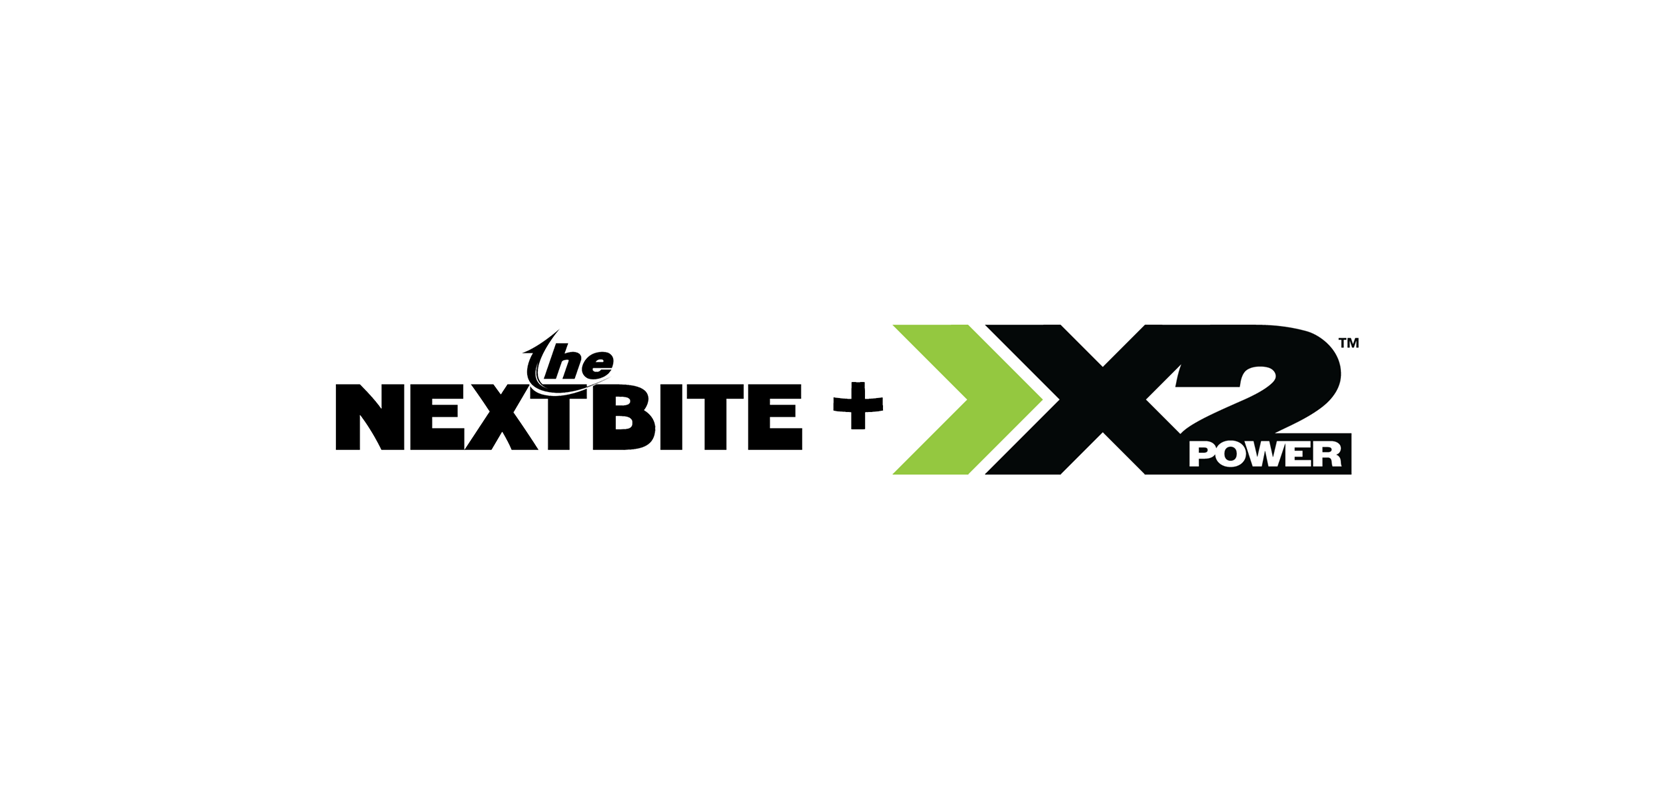 The Next Bite TV and X2Power Batteries logos